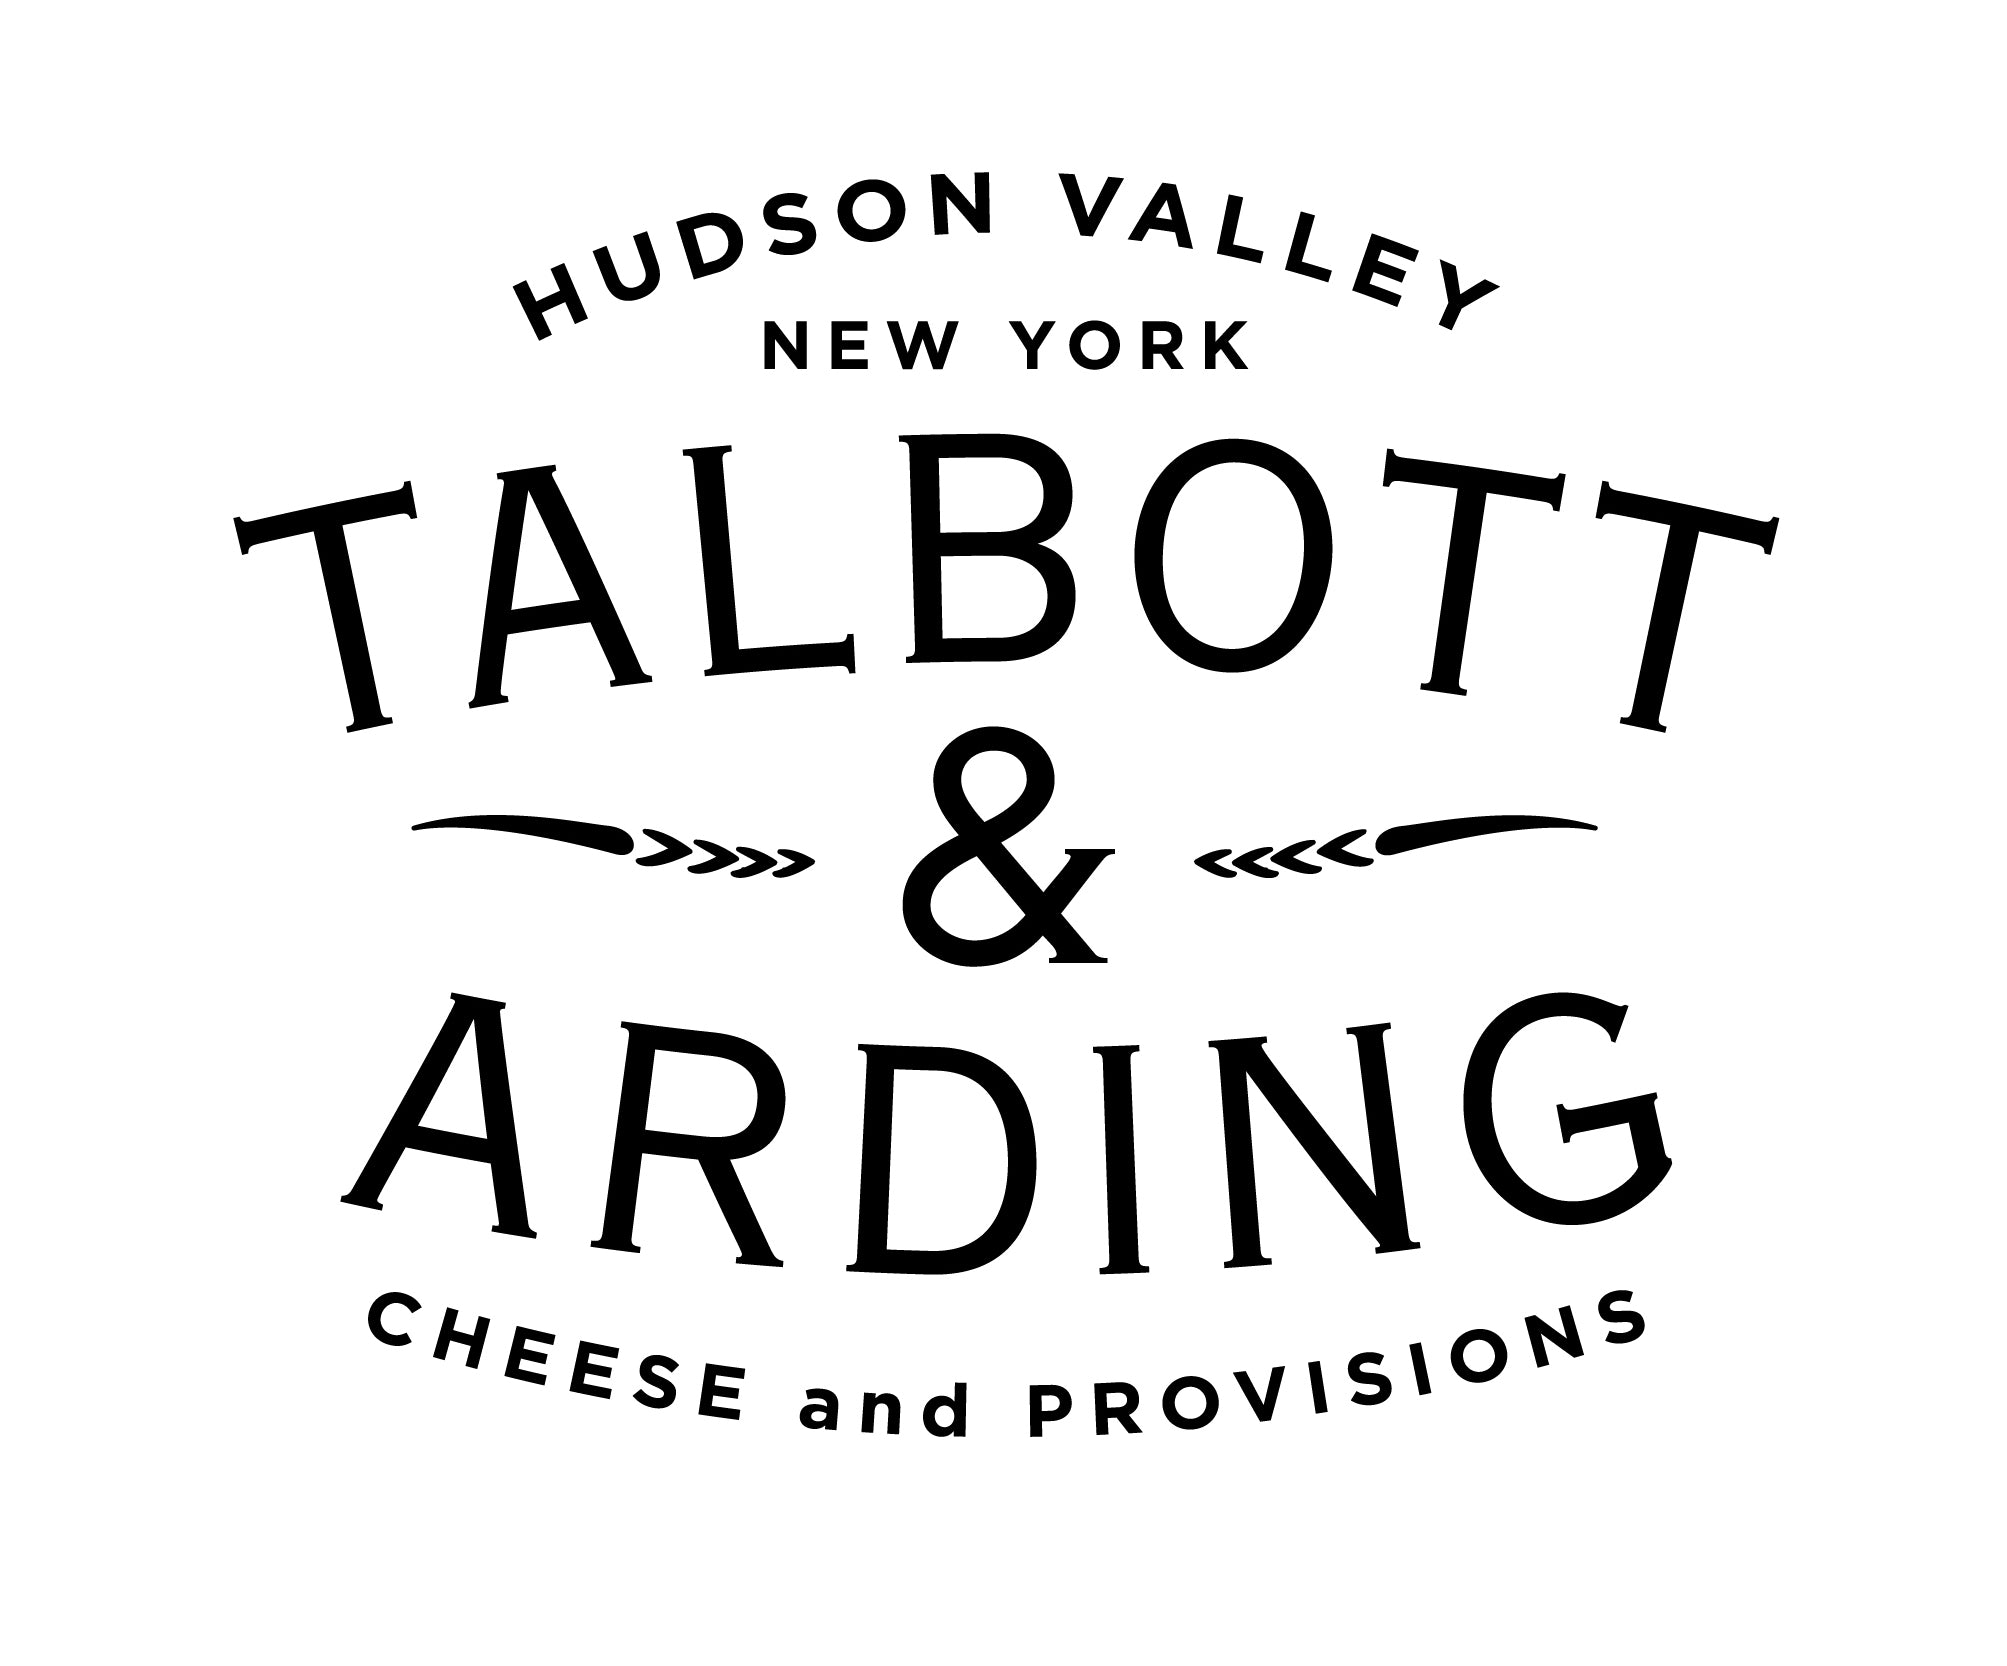 Logo of Talbott & Arding Cheese and Provisions.